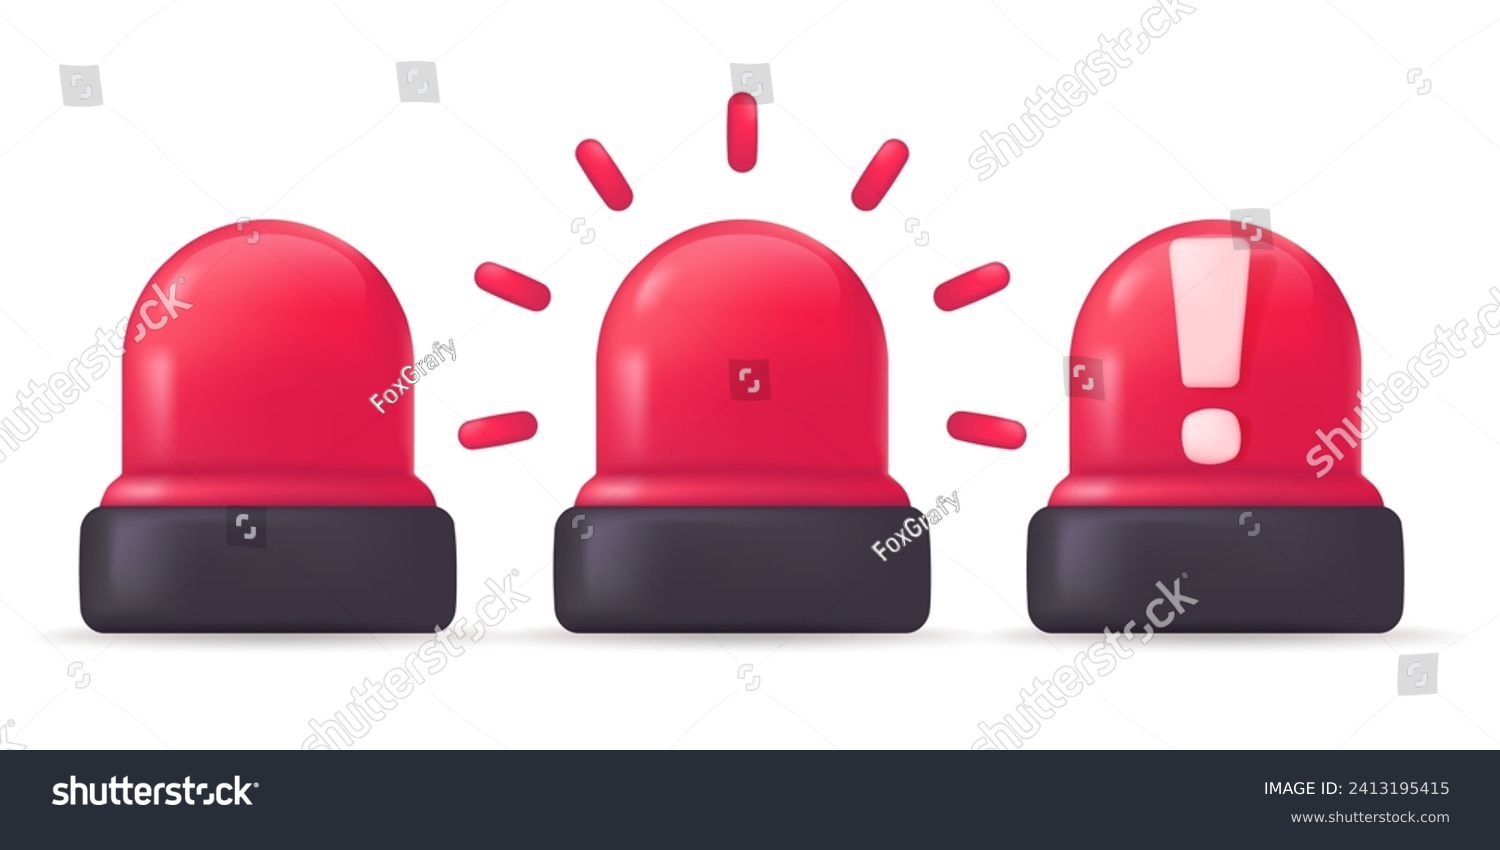 SVG of Ambulance siren lights for monitoring and warning of emergency situations. 3D vector illustration. svg